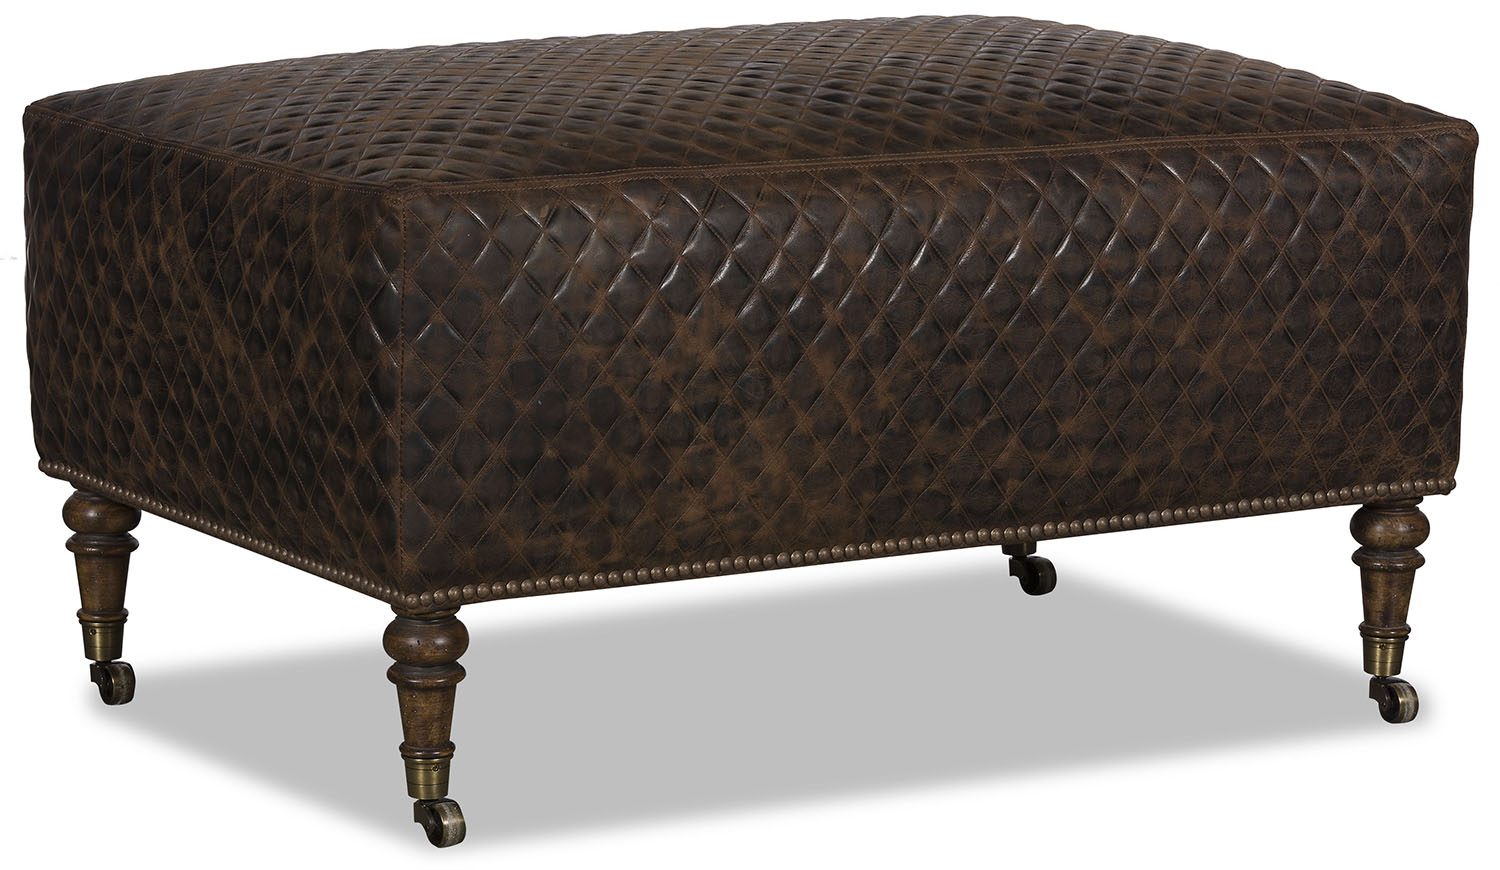 93-11 RECT 31 TO 36 INCH WIDE – OTTOMAN SHOP